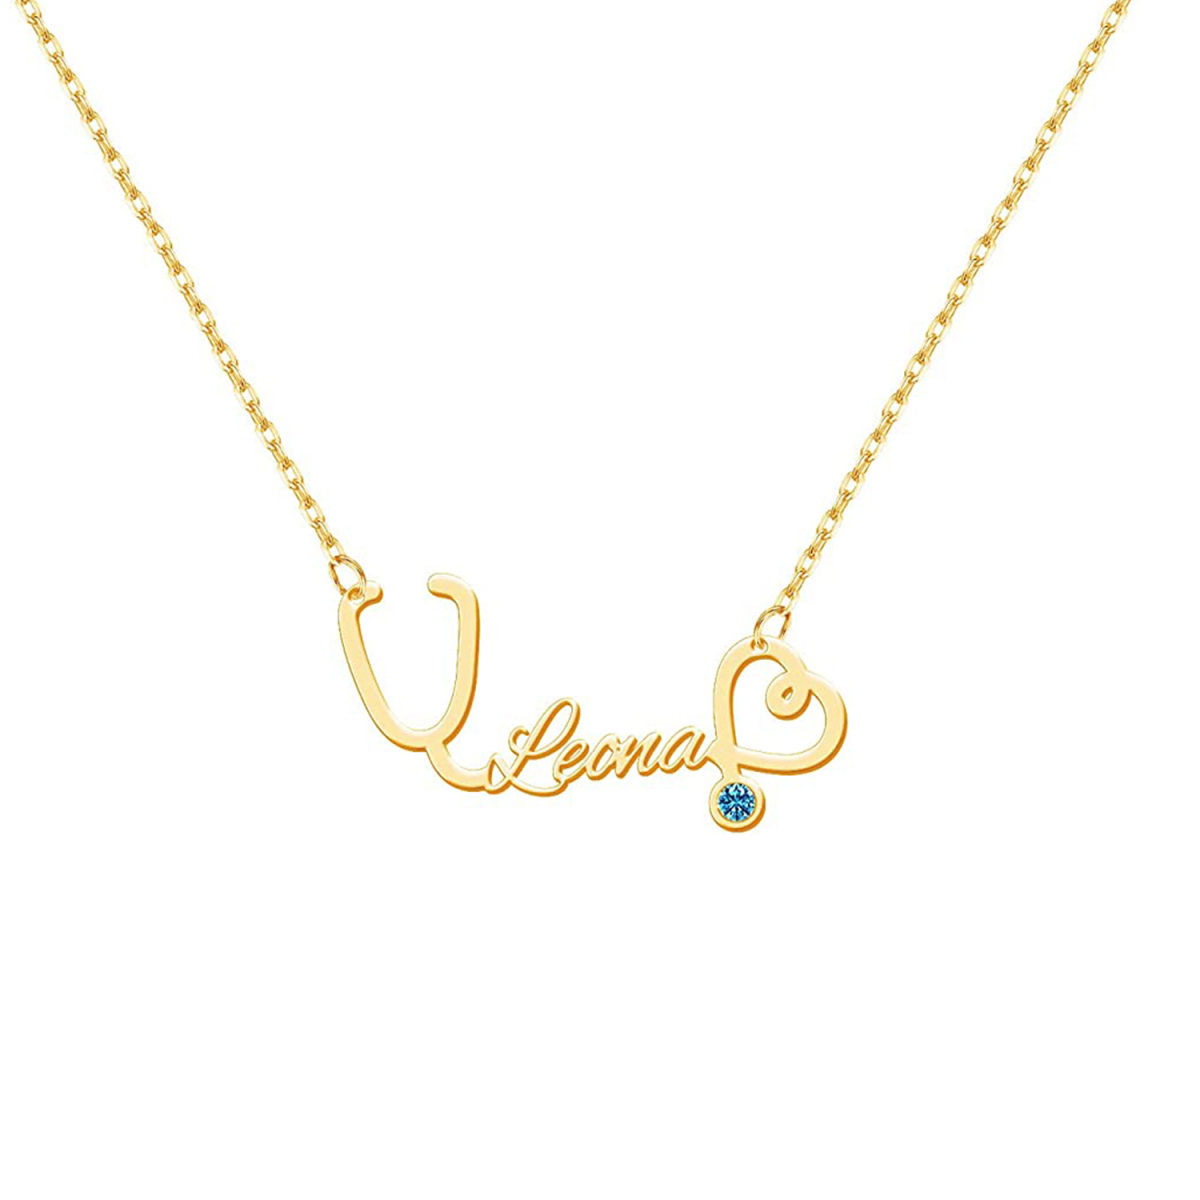 10K Gold Circular Shaped Cubic Zirconia Personalized Classic Name Pendant Necklace-1